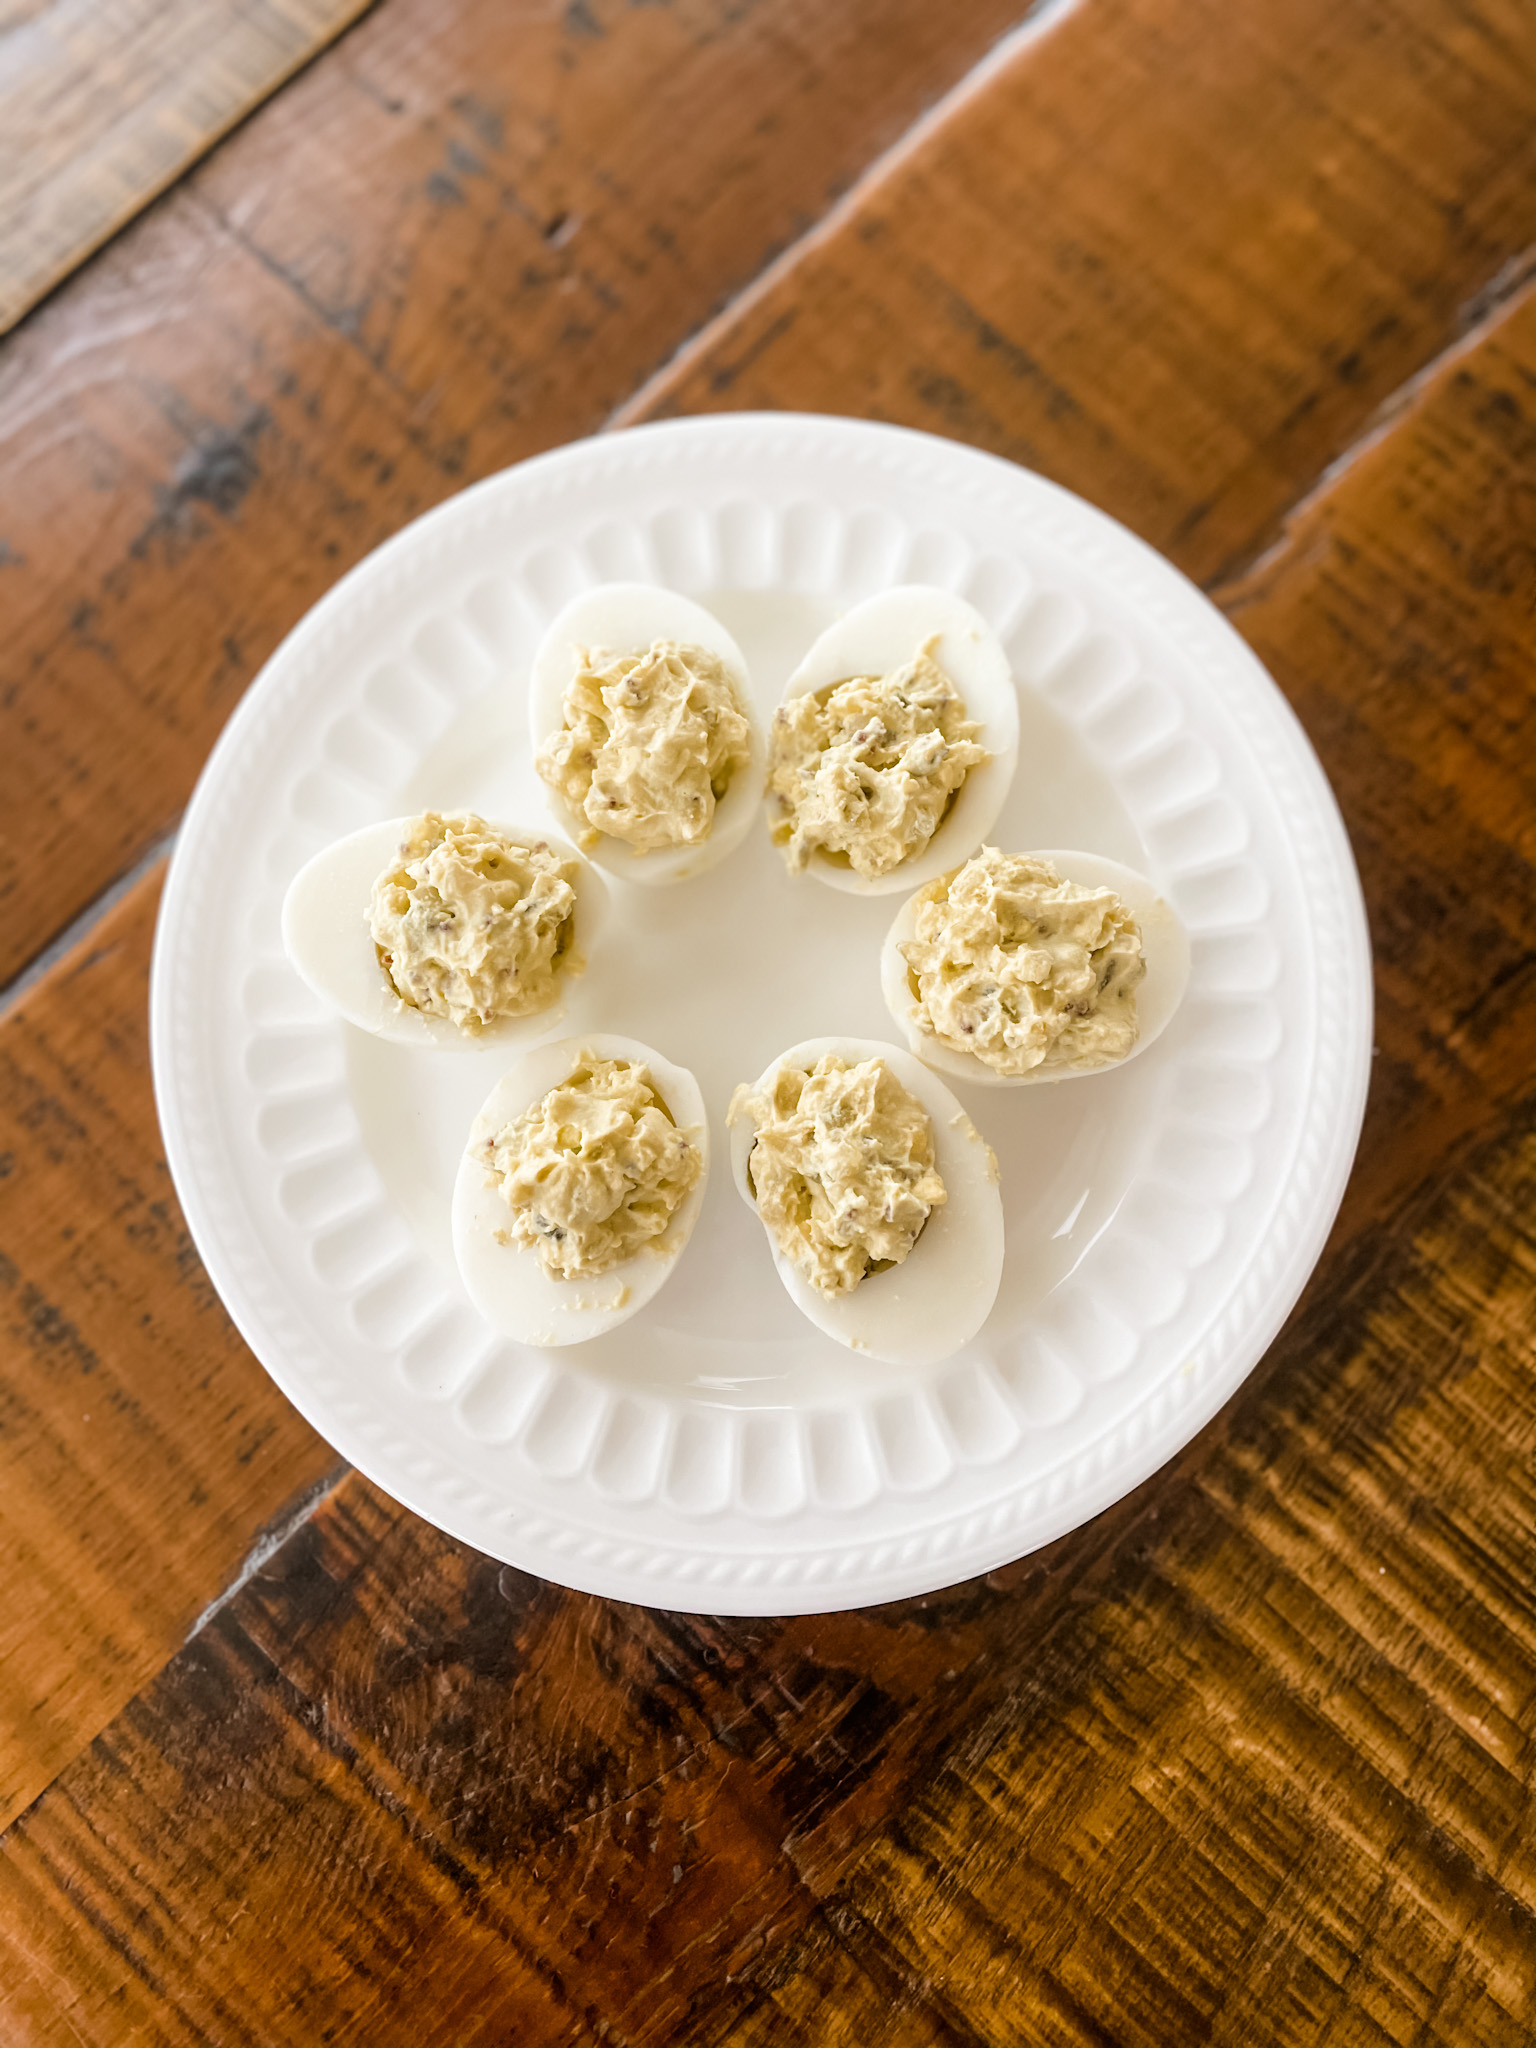 The basic version of the lighter deviled eggs on a white plate.